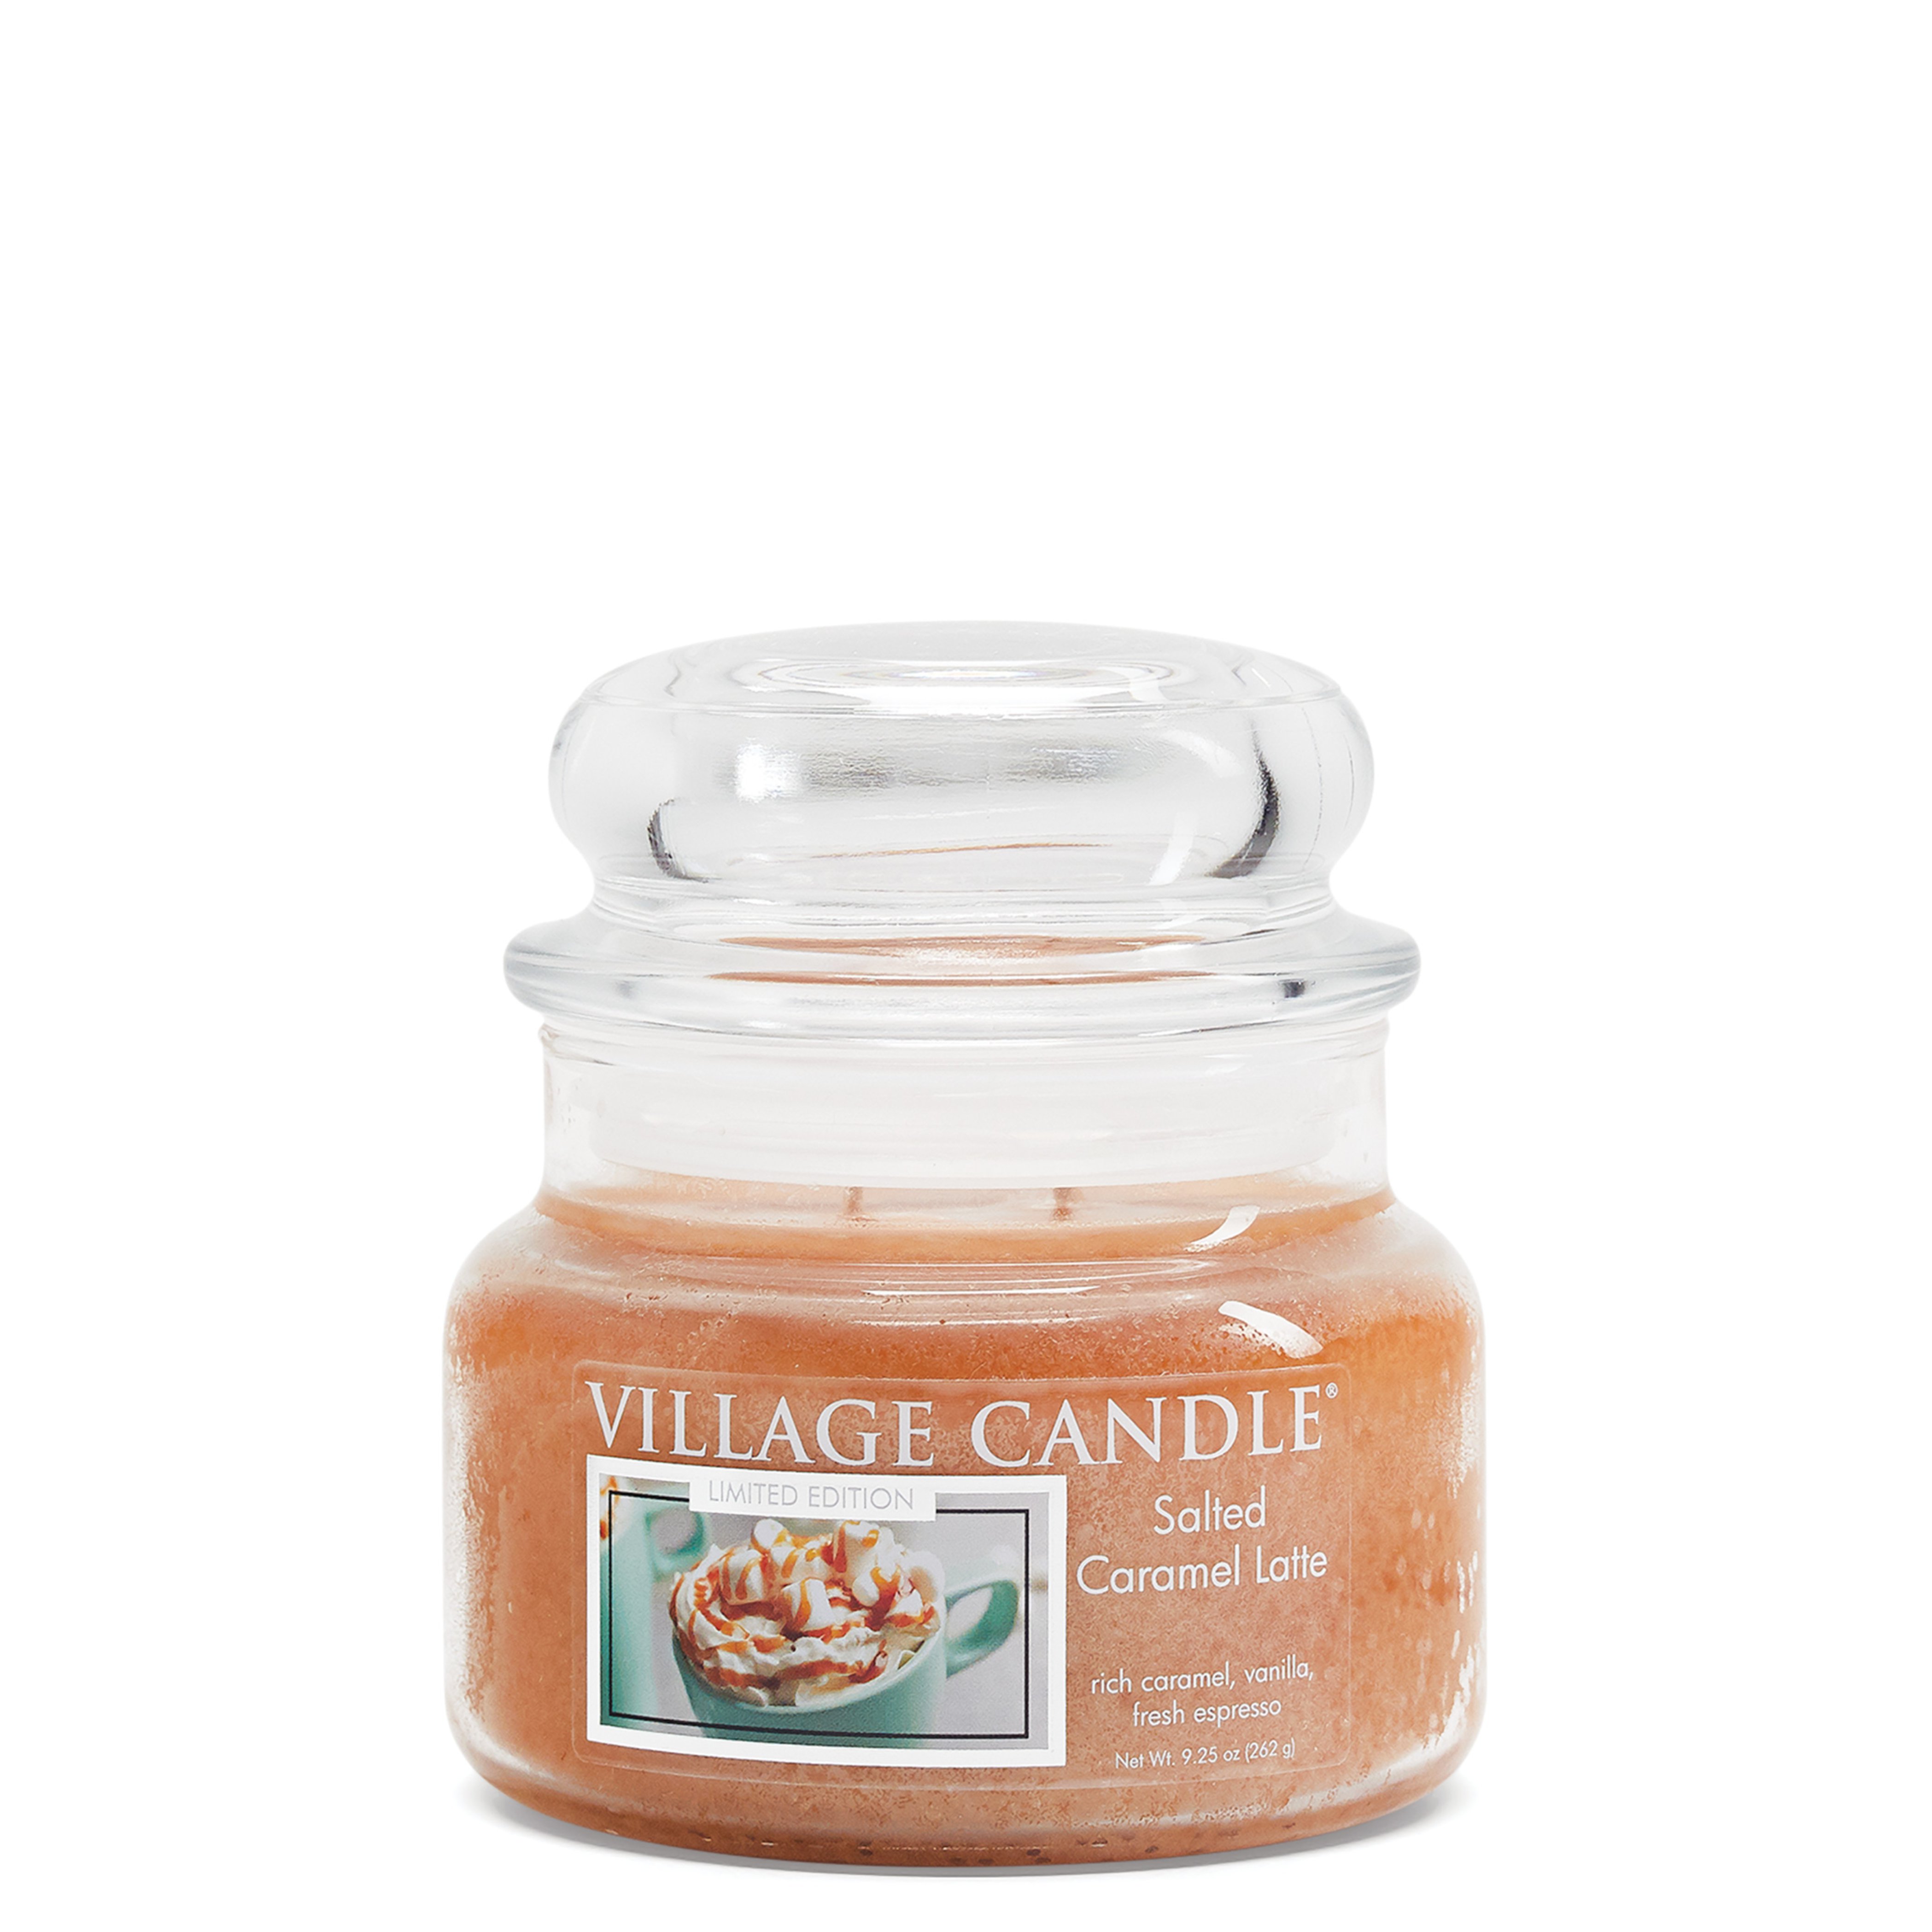 Tradition Jar Dome Small 262 g Salted Caramel Latte